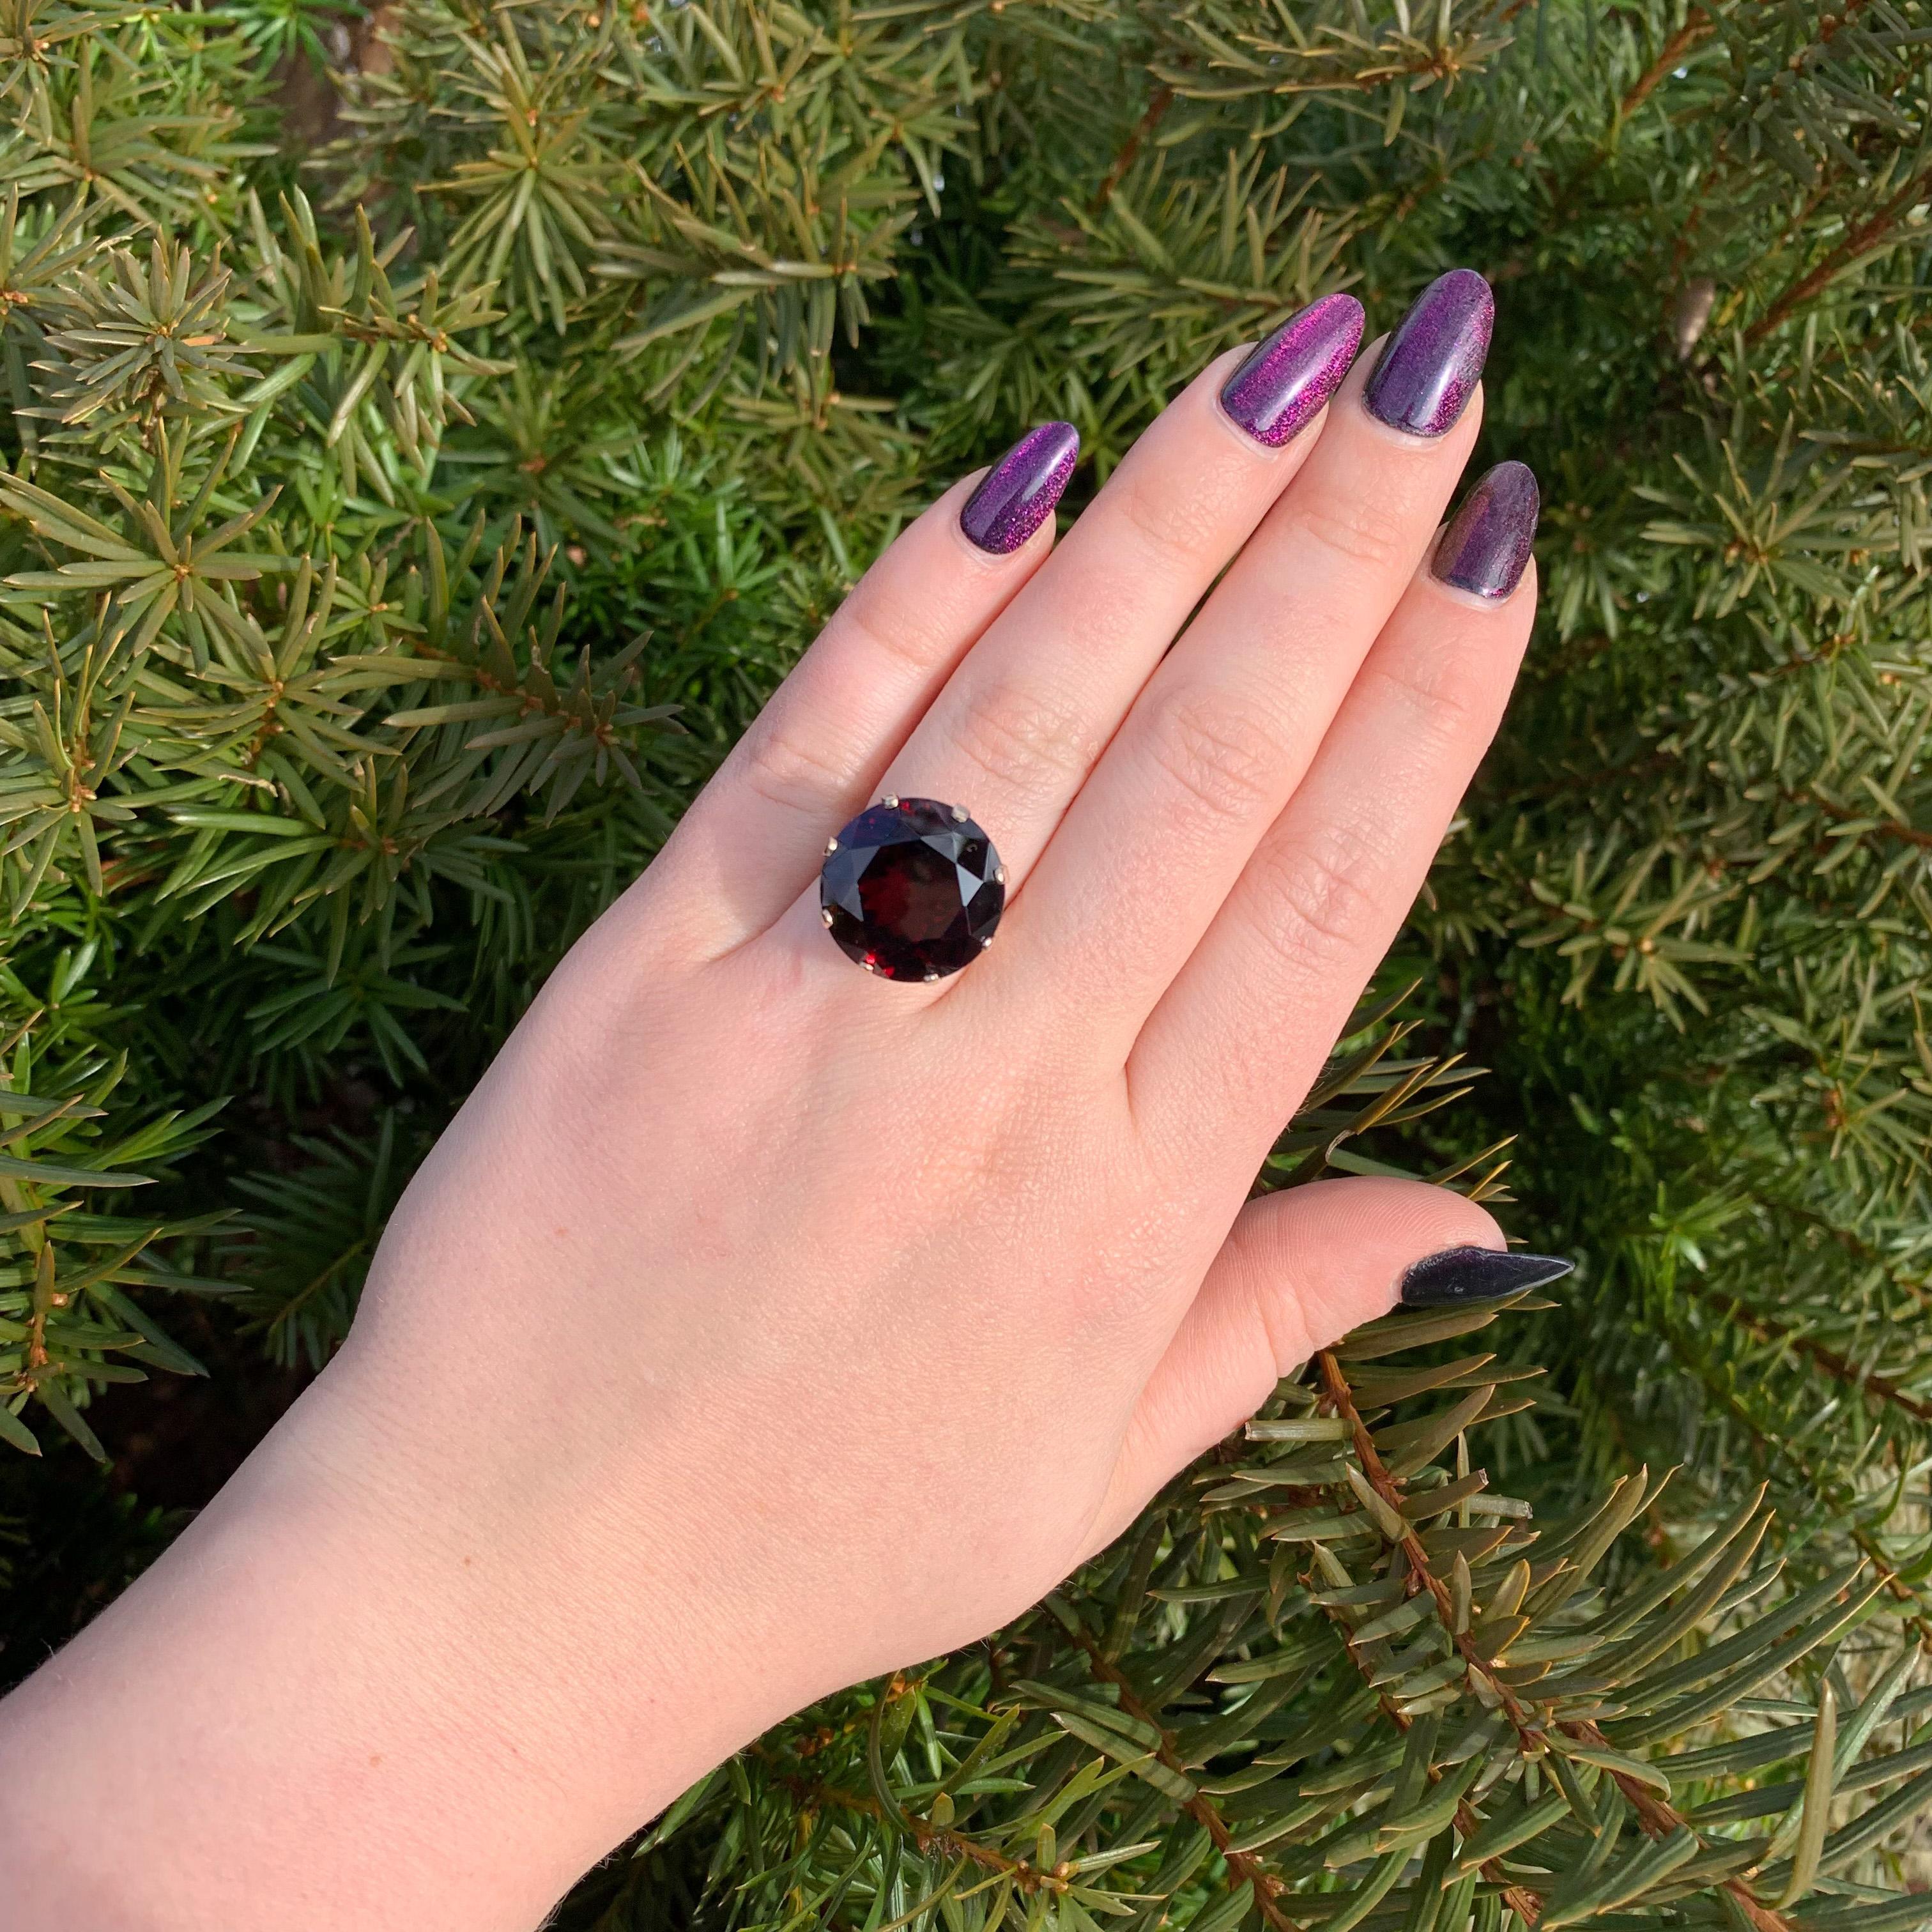 14K Yellow Gold Ring with a Huge 27 carat Round Garnet For Sale 1